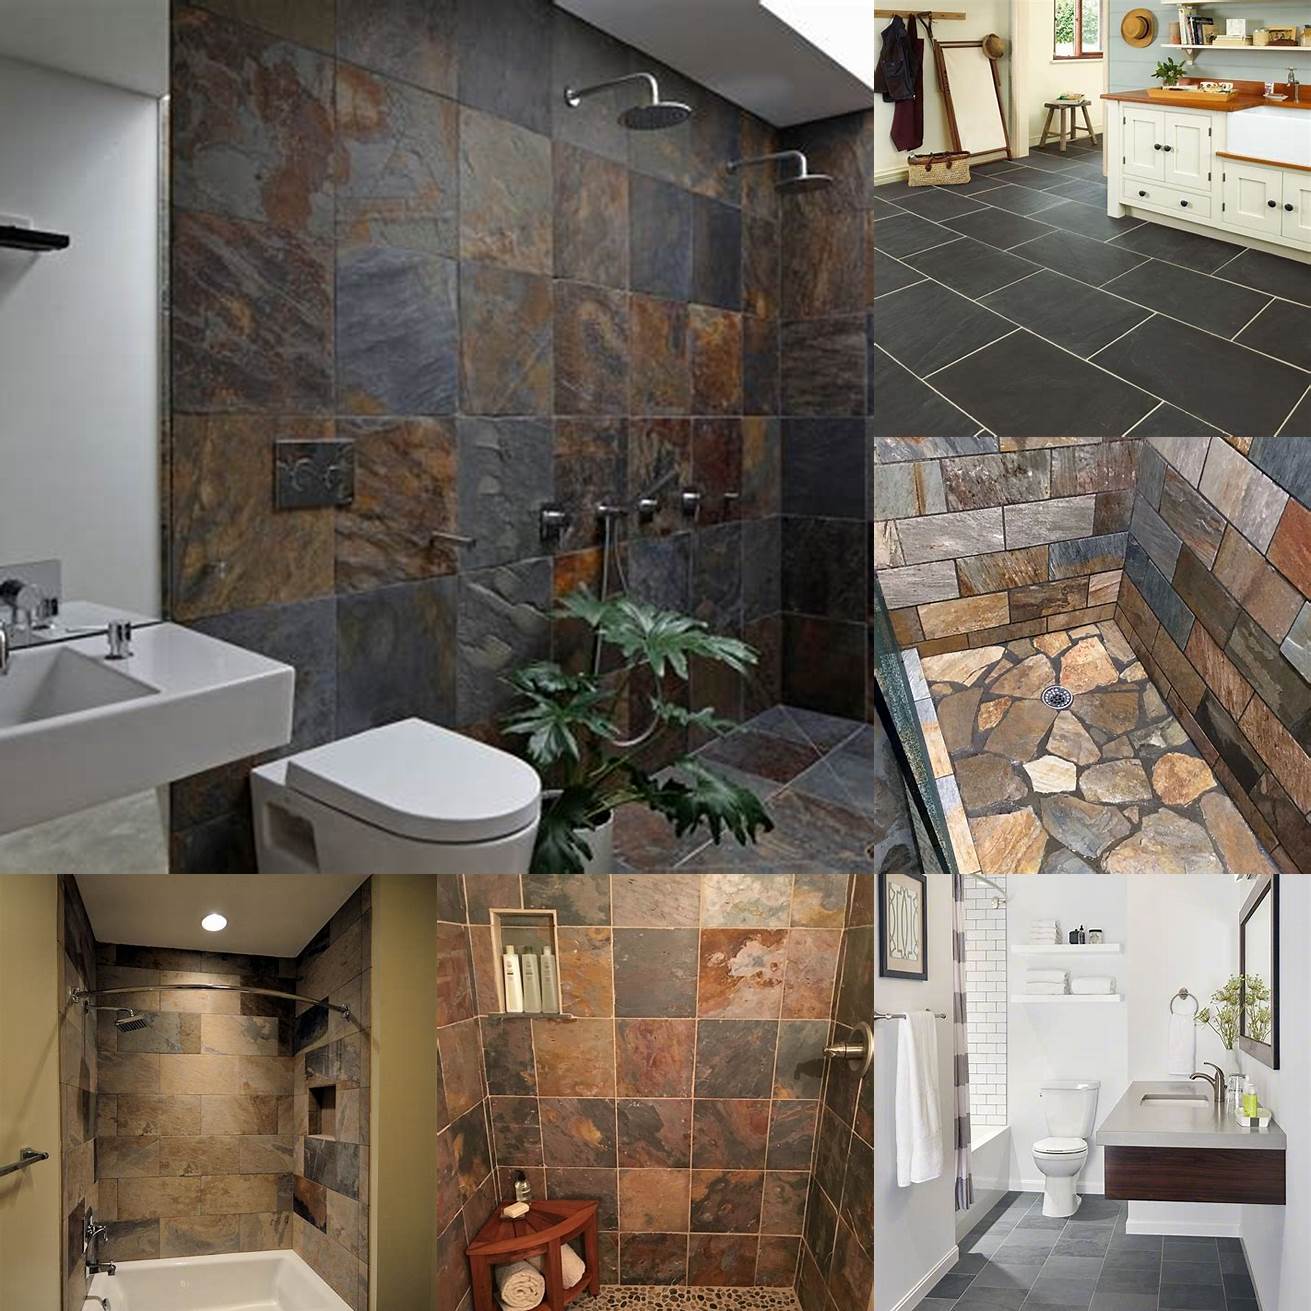 Slate floor tiles give a rustic and earthy look to your bathroom